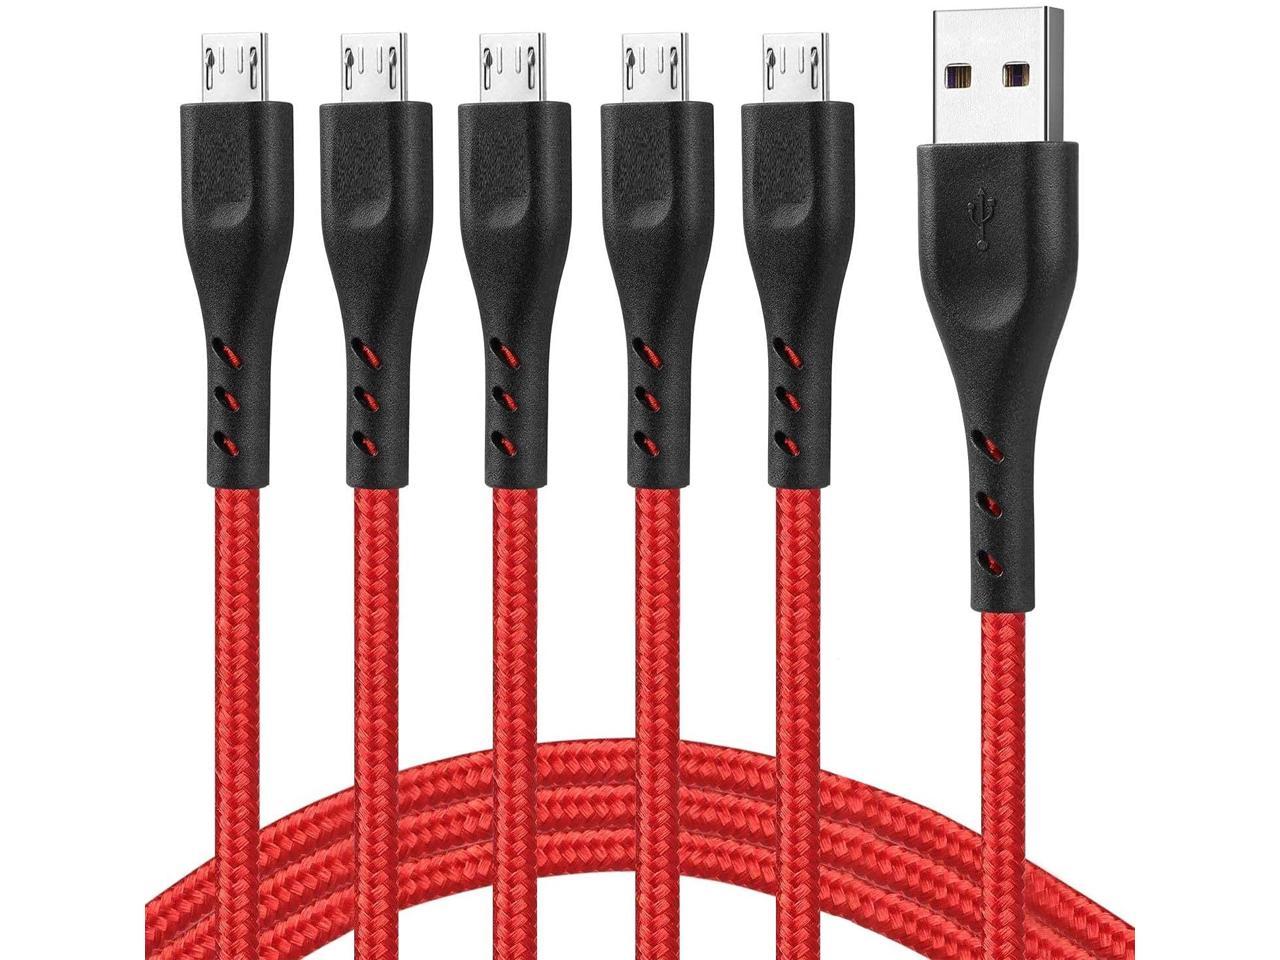 BlackBerry HTC Android Phone Fast Charger Cord with Extra Long Length for Samsung Galaxy S7 Edge/S7/S6 Edge/S6 LG G4 Note 5/4/2 Micro USB Charging Cable Motorola 4 Pack 3ft 6ft 6ft 10ft 